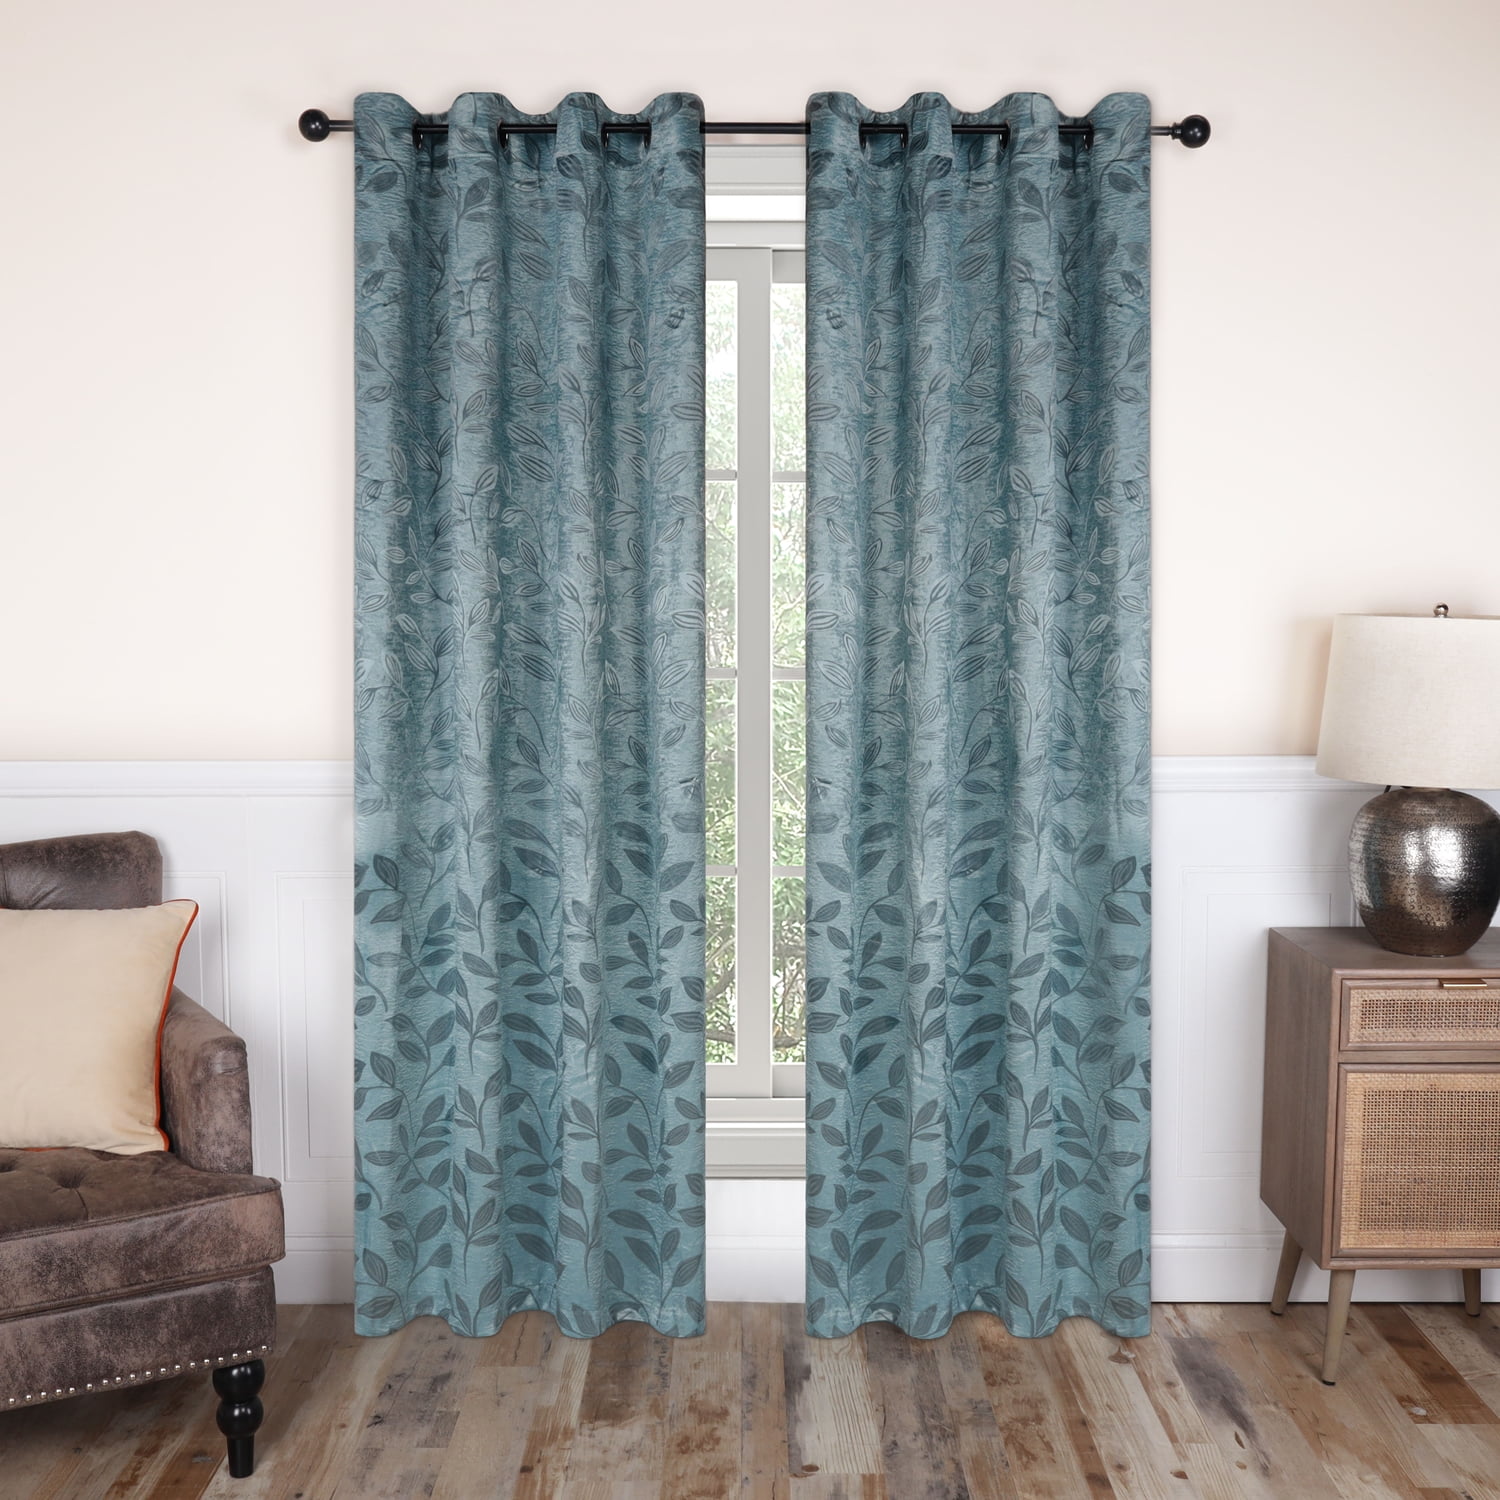 Superior Modern/Transitional 2 Pieces Nature/Leaves Blackout Curtain ...